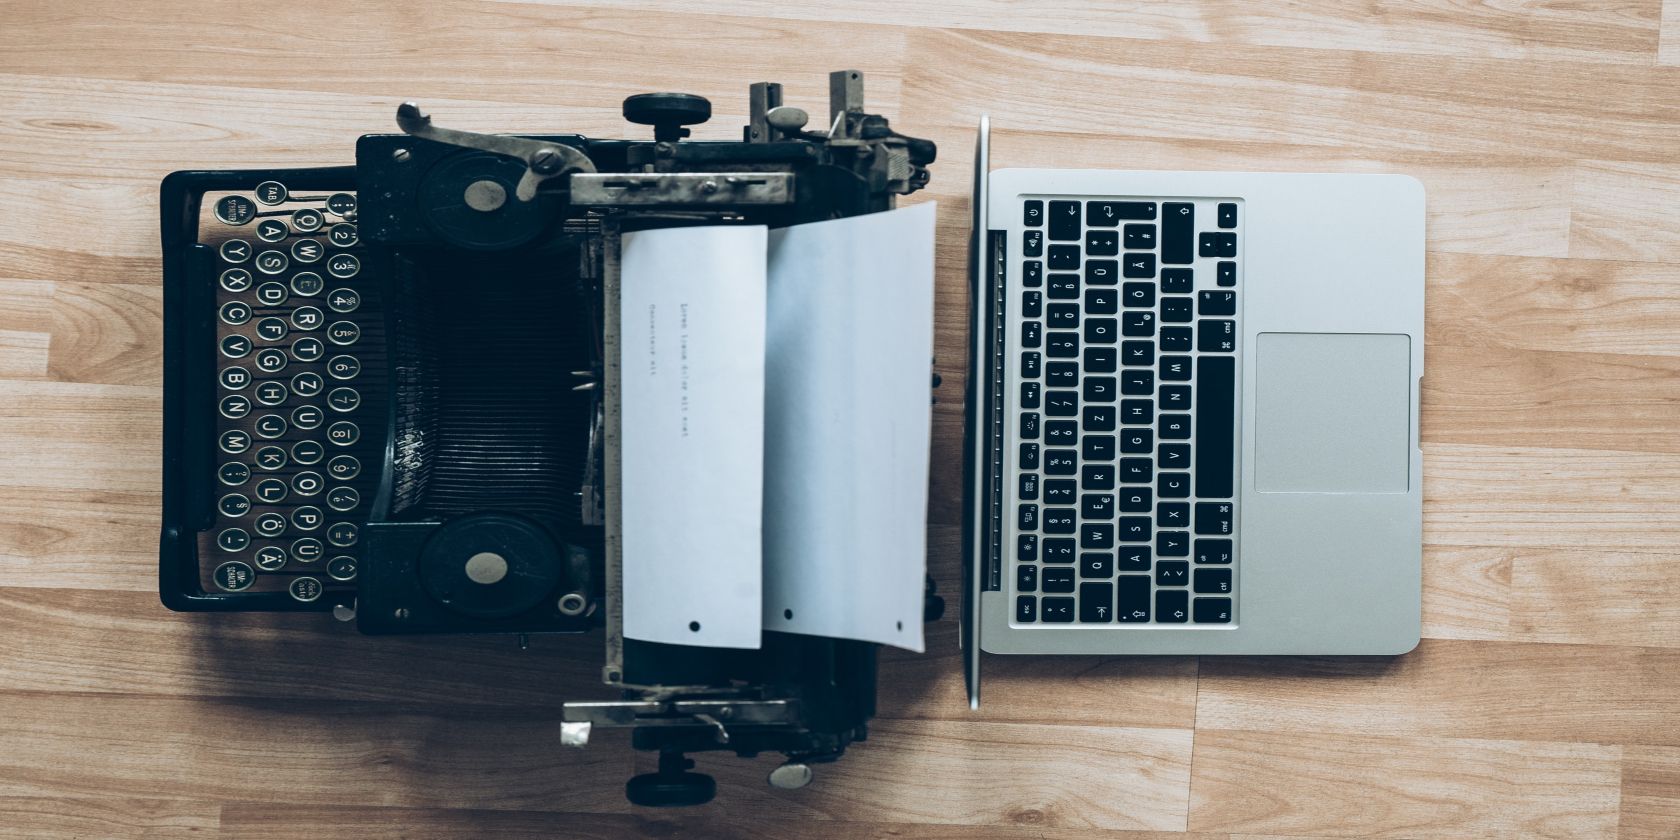 Image shows a typewriter next to a MacBook